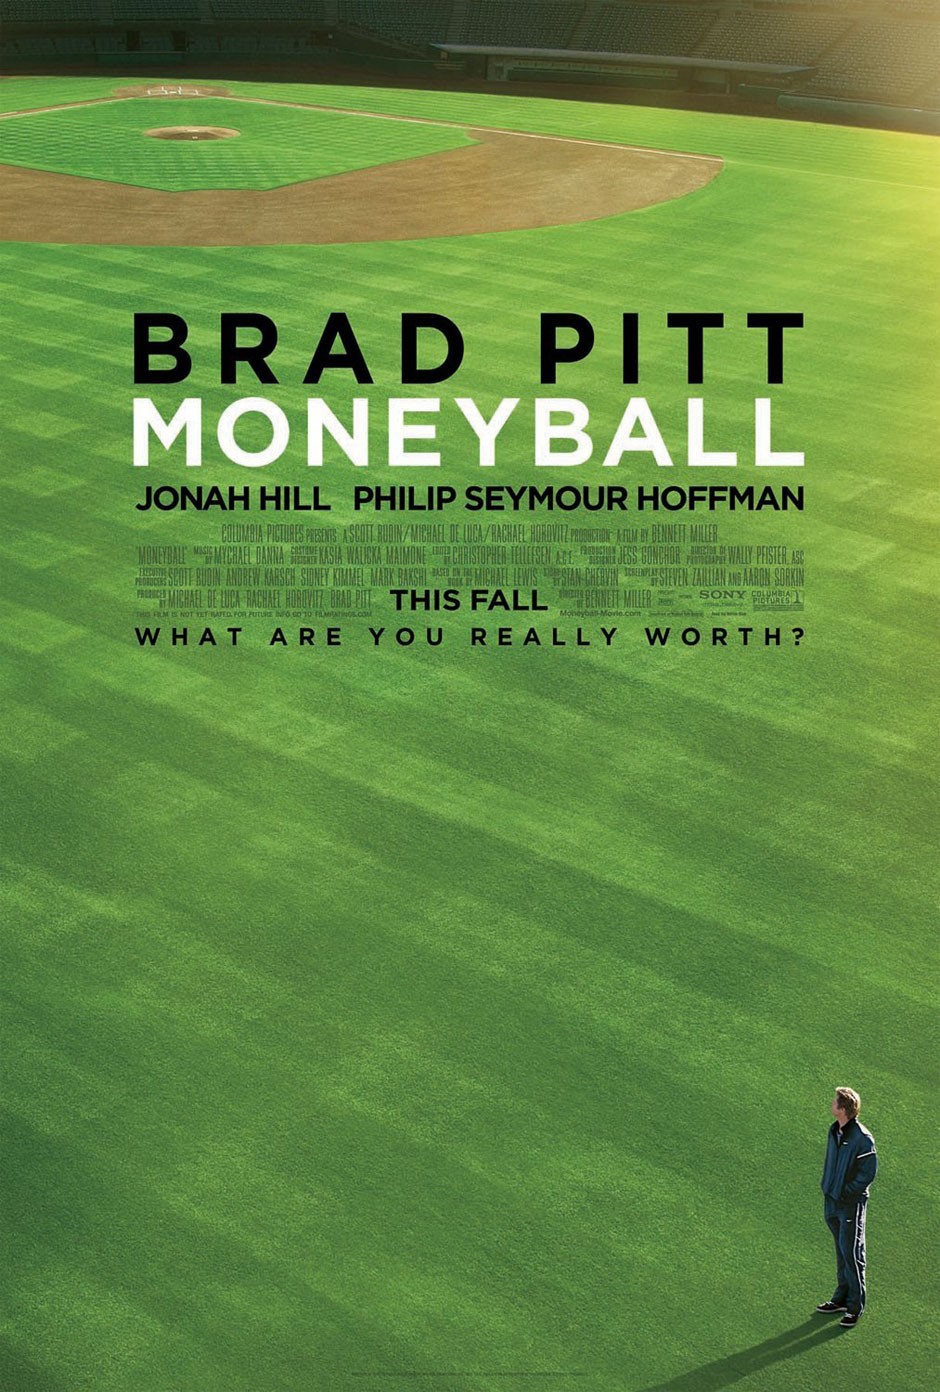 Moneyball and the Beginning, Middle, and End of Innovation - Mile Zero